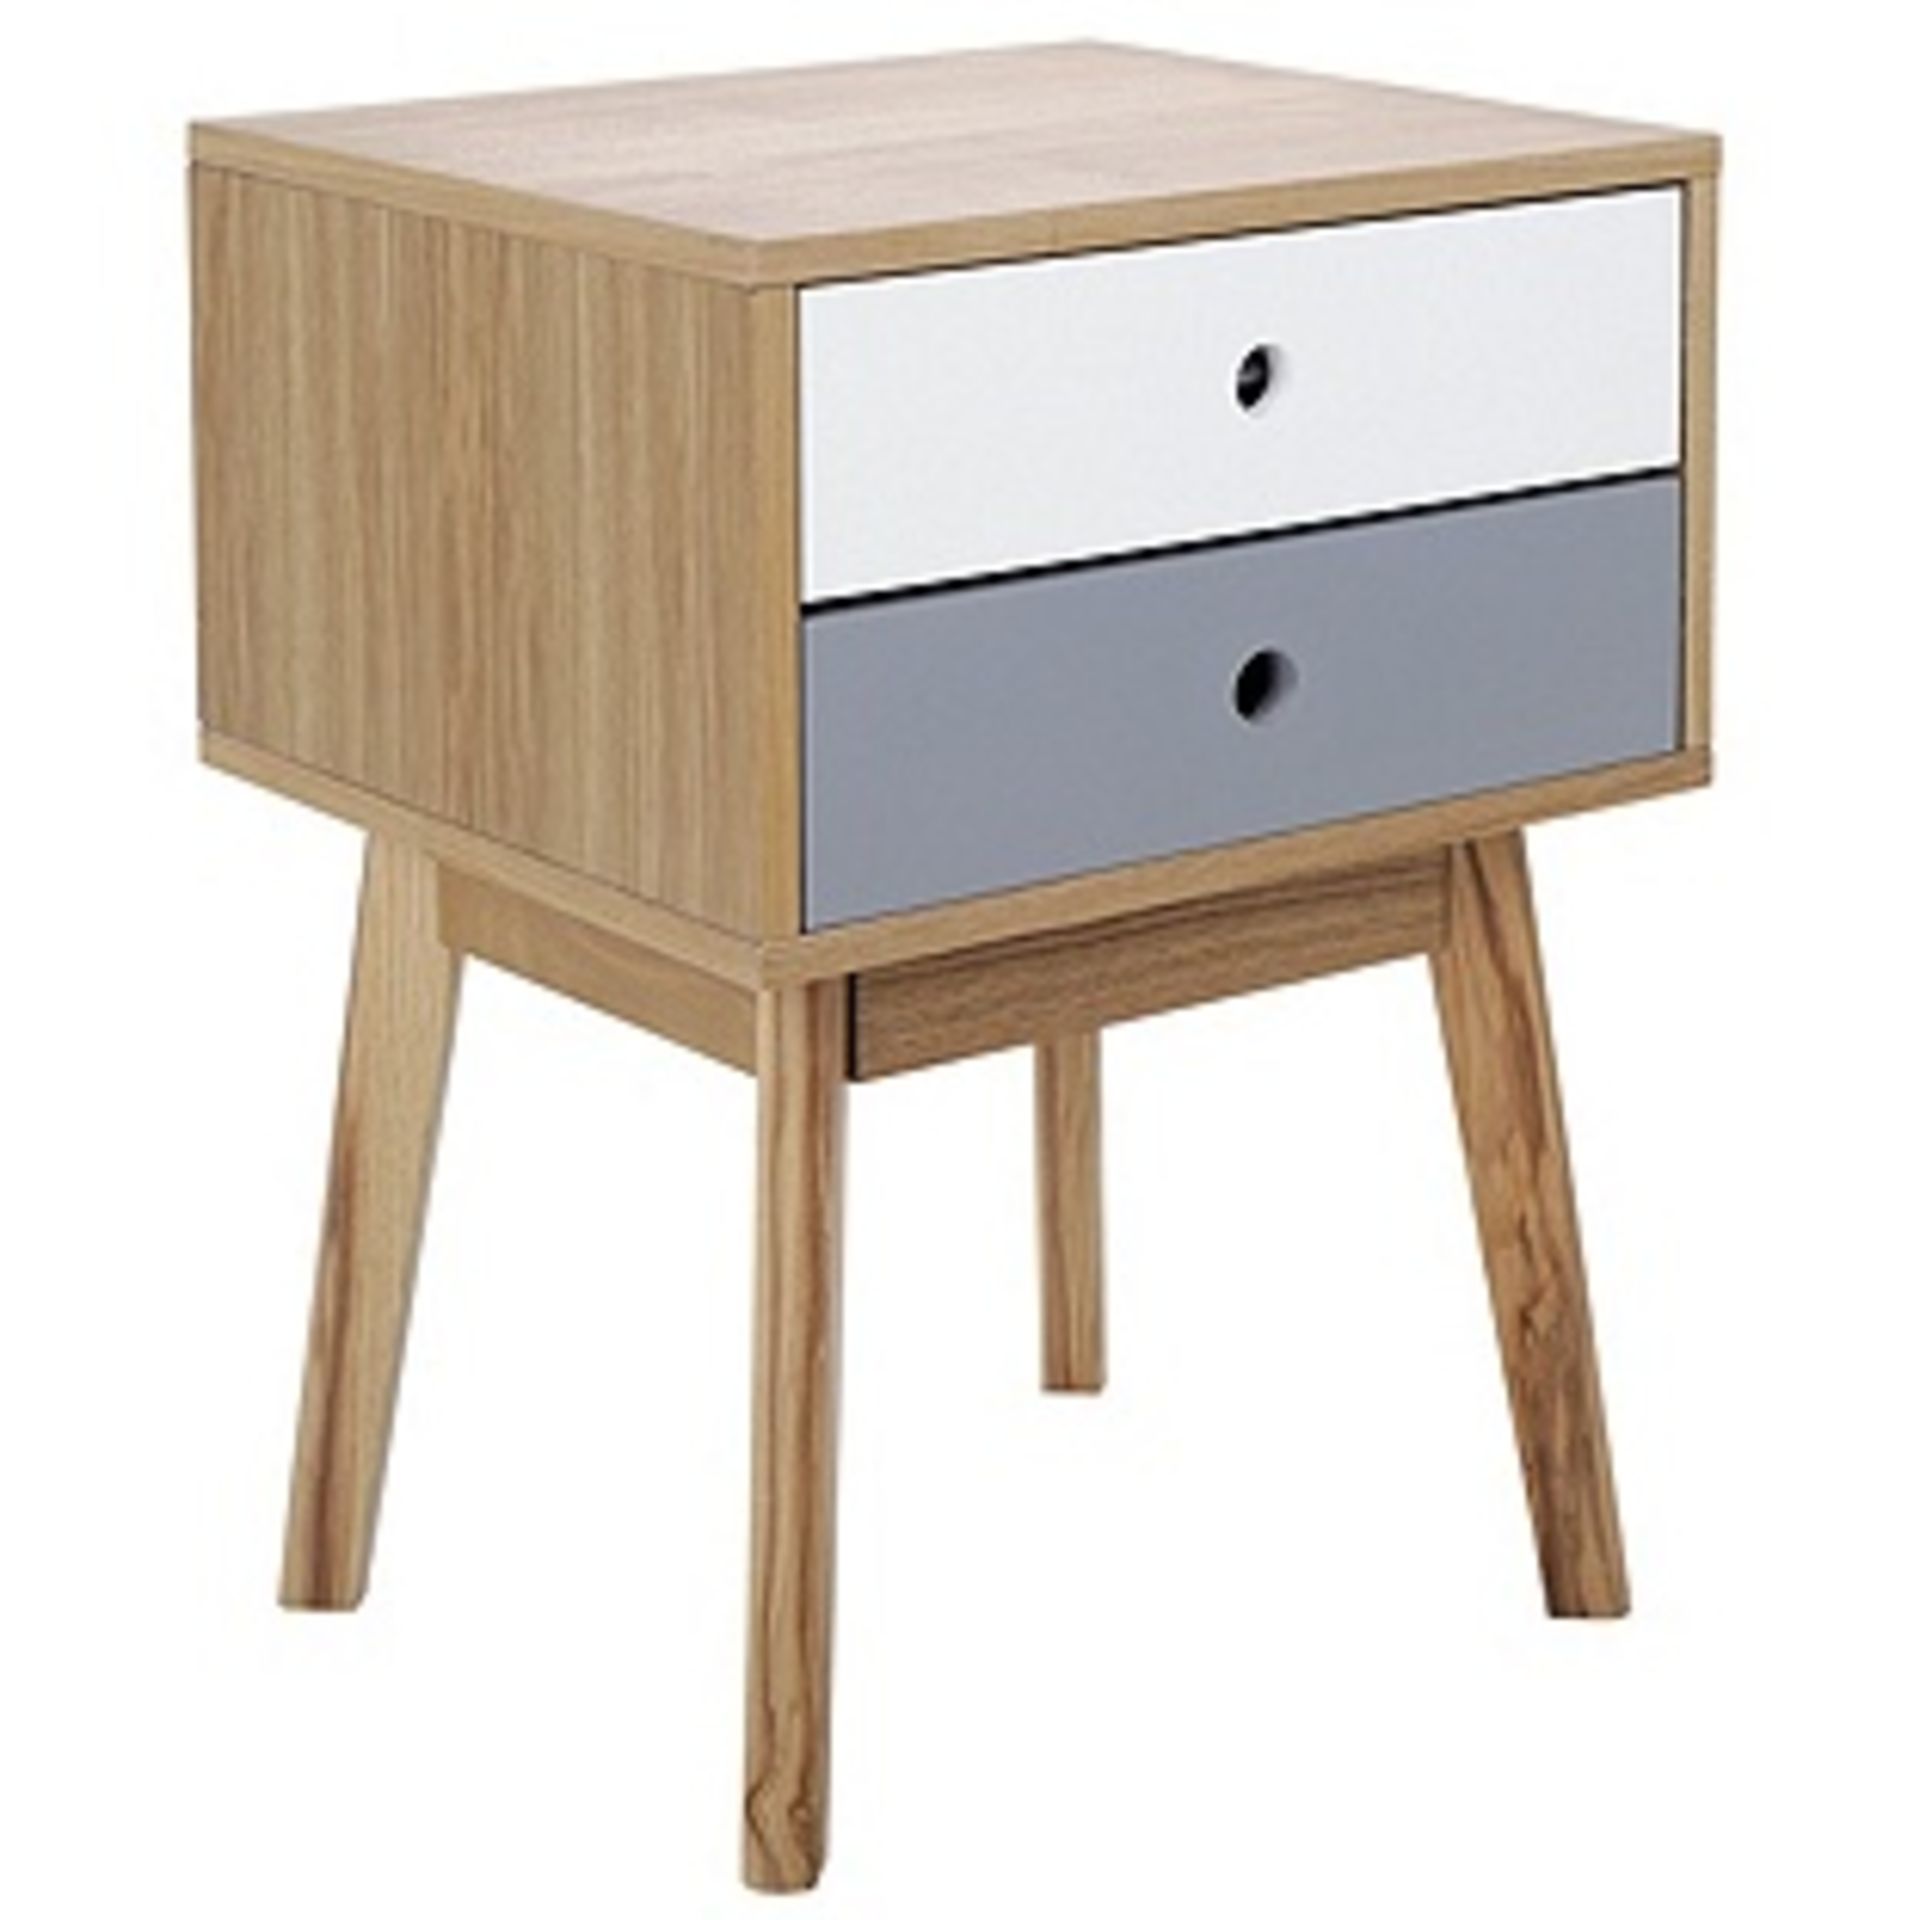 Foley 2 Drawer End Table - Two Tone. Size H58, W40, D38cm.   Please Note Pictures are for